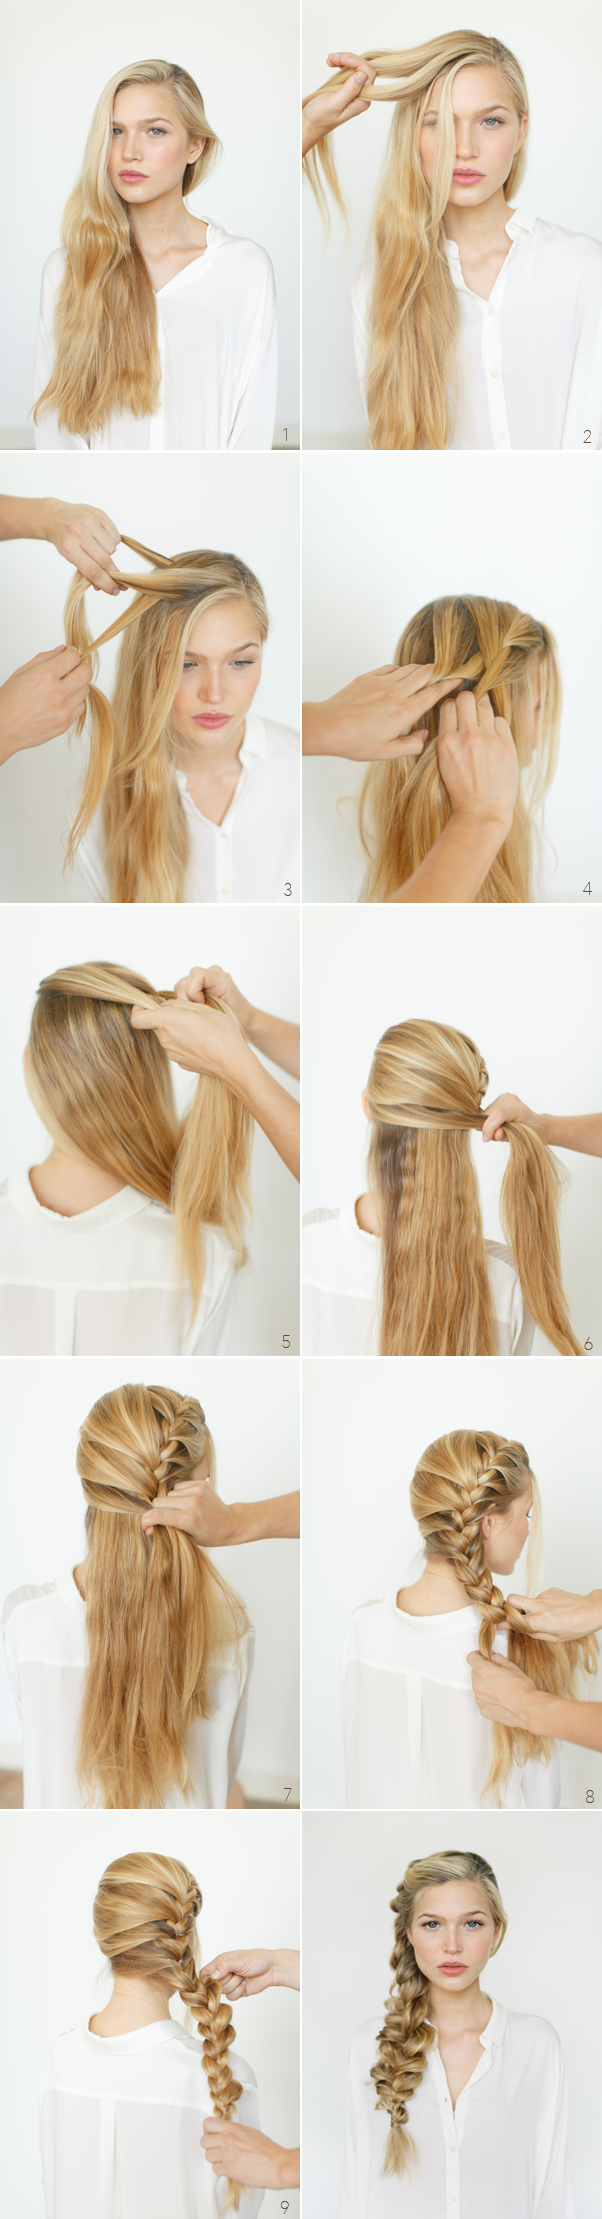 16 Stupendous Step By Step Hairstyle Tutorials Style For Hair